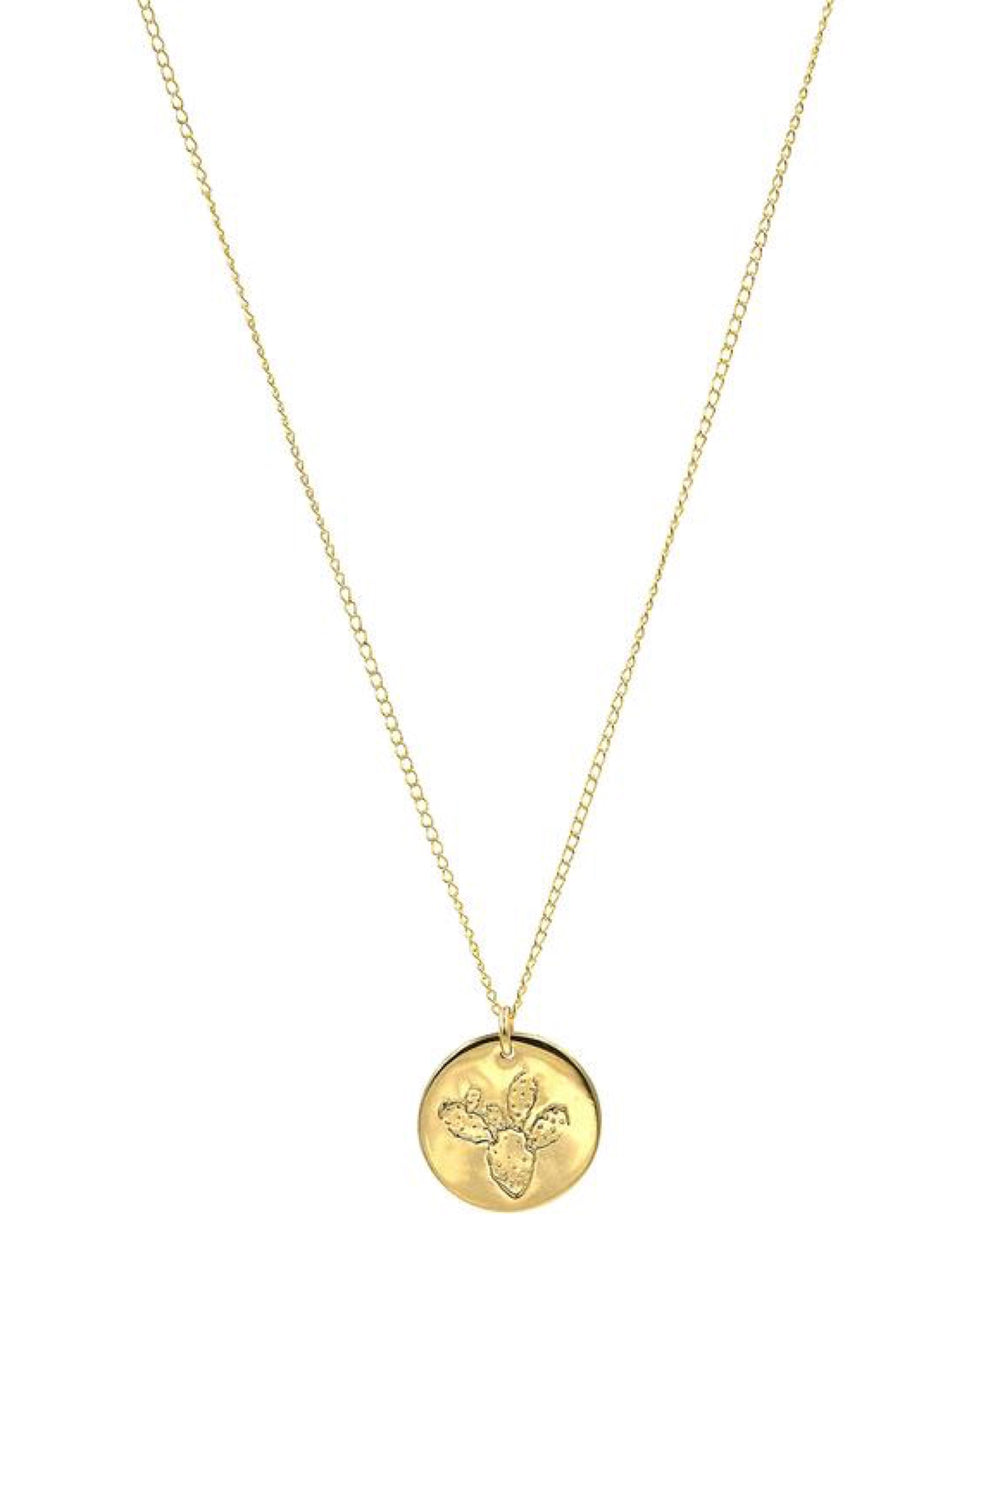 Gold Prickly Pear Coin Necklace